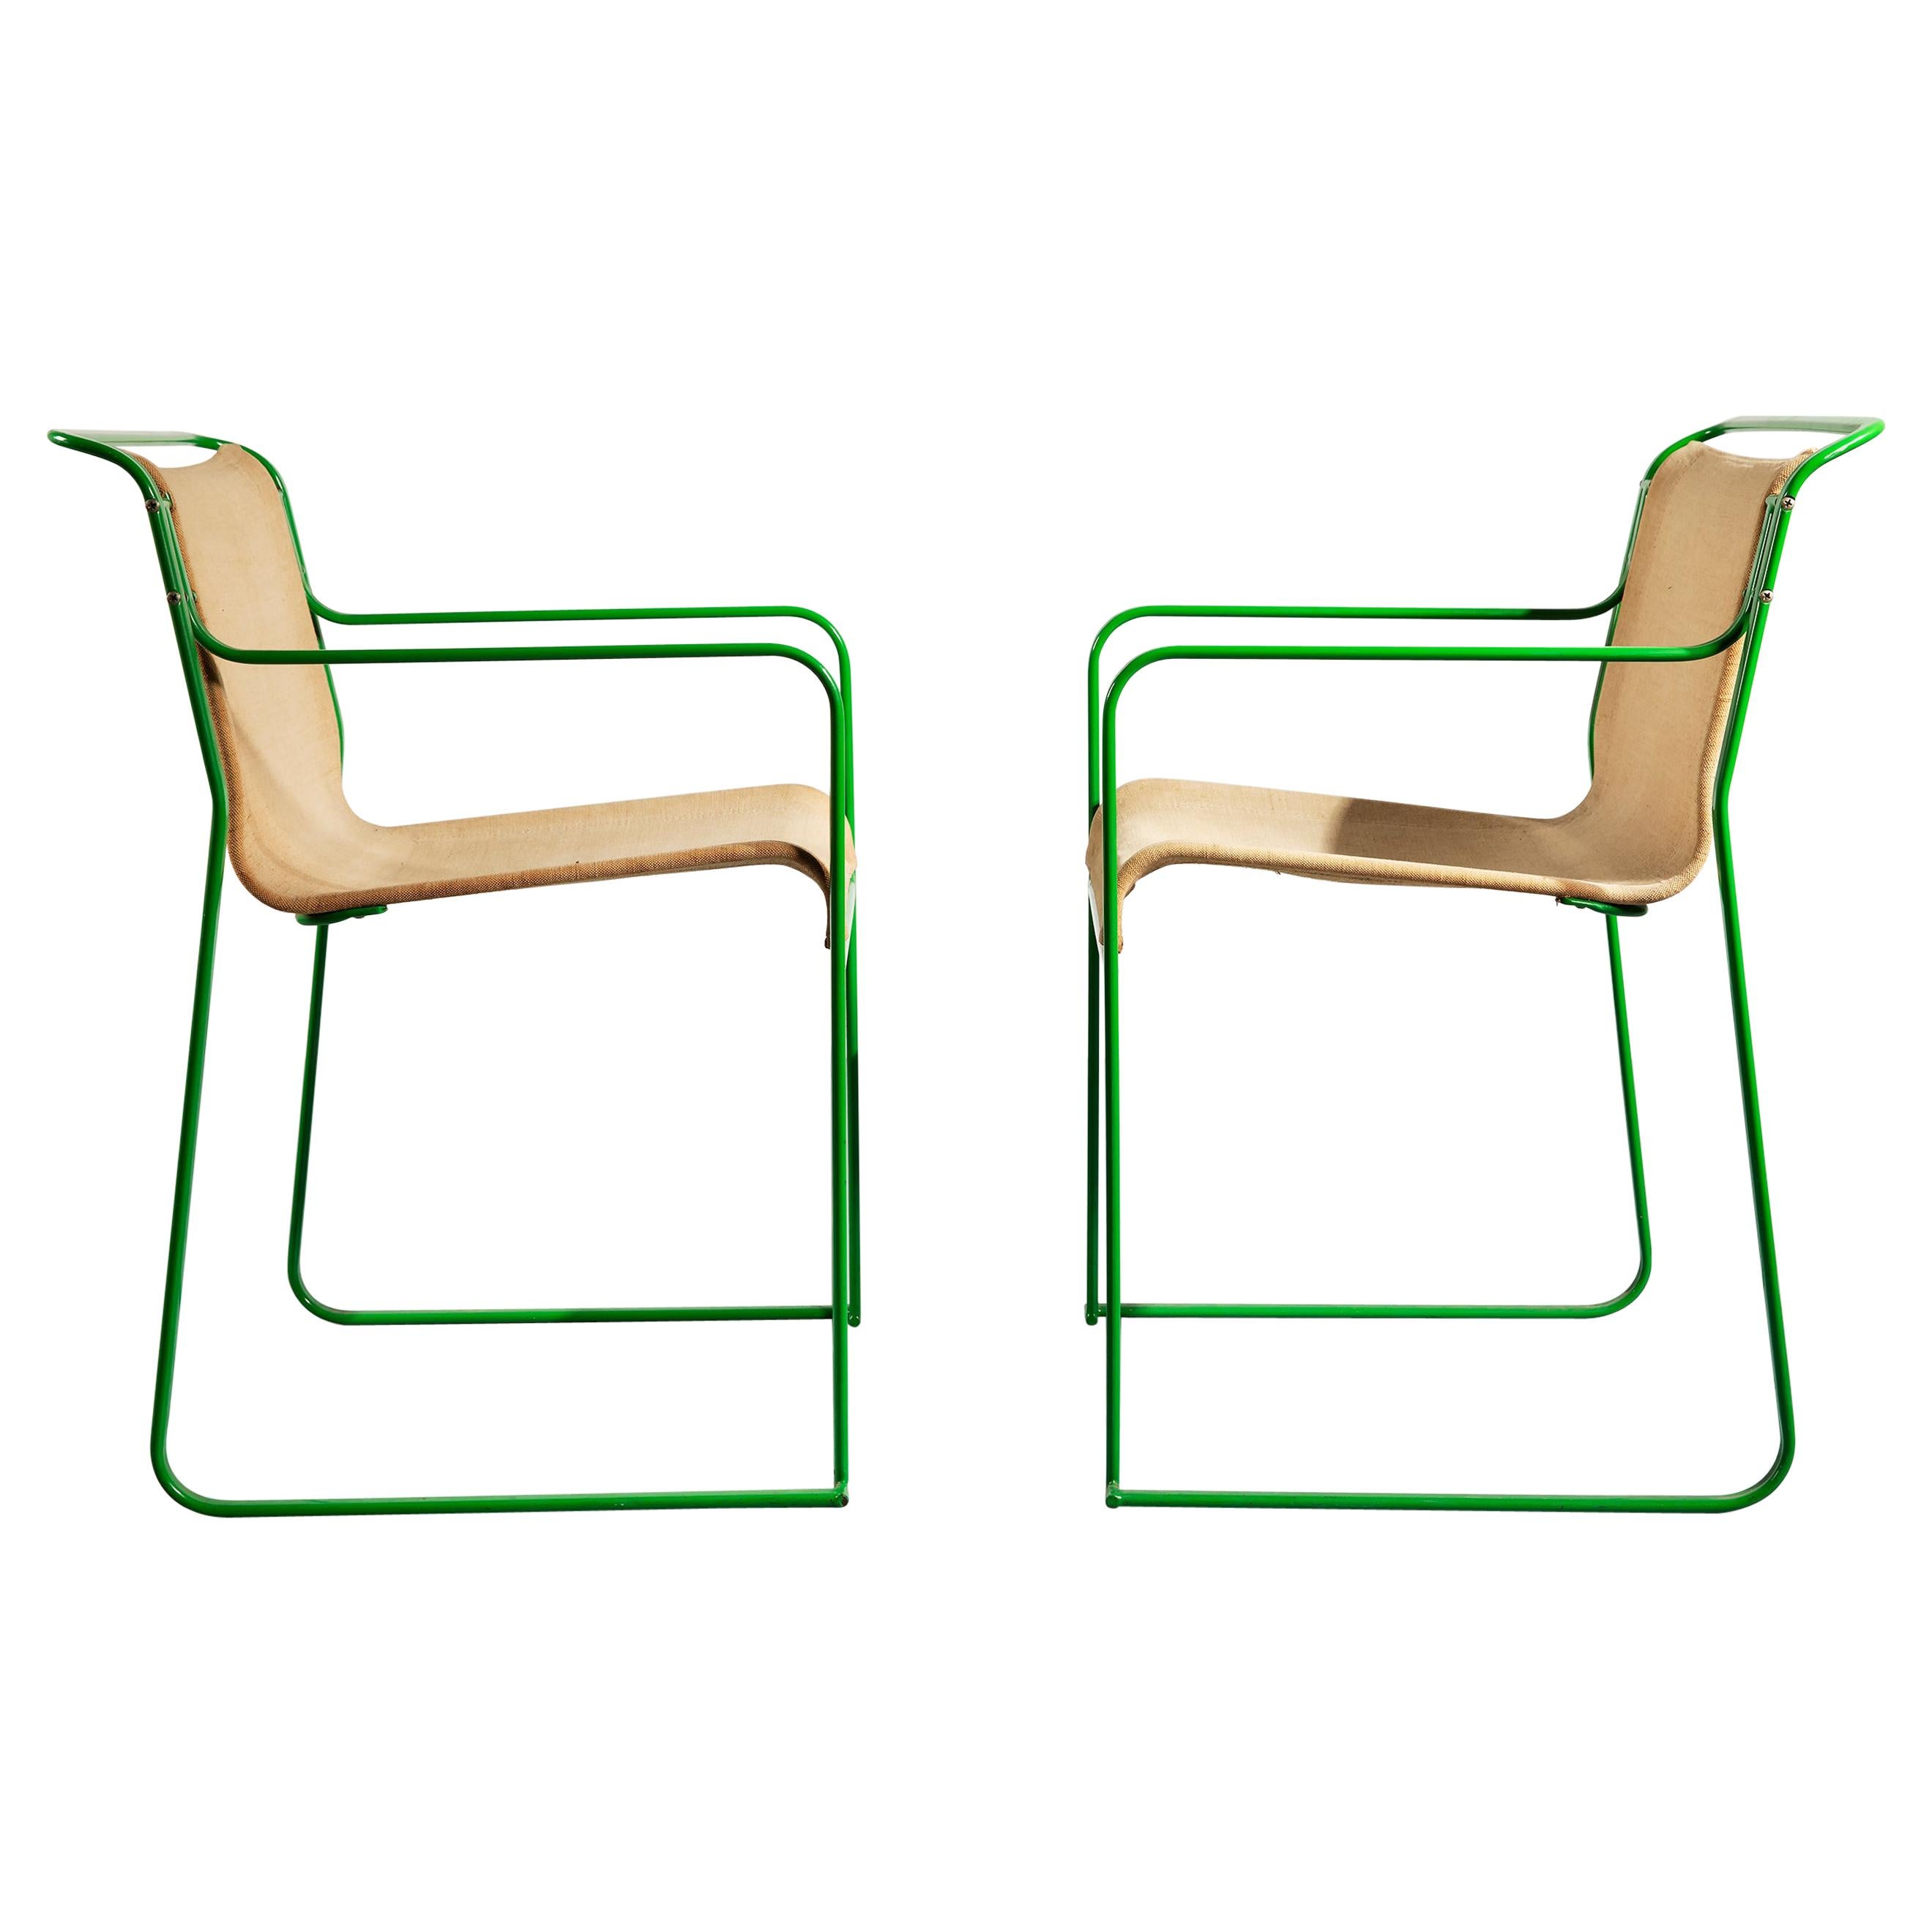 Pair of Gastone Rinaldi Green Lacquered Steel and Canvas Armchairs, 1979 For Sale